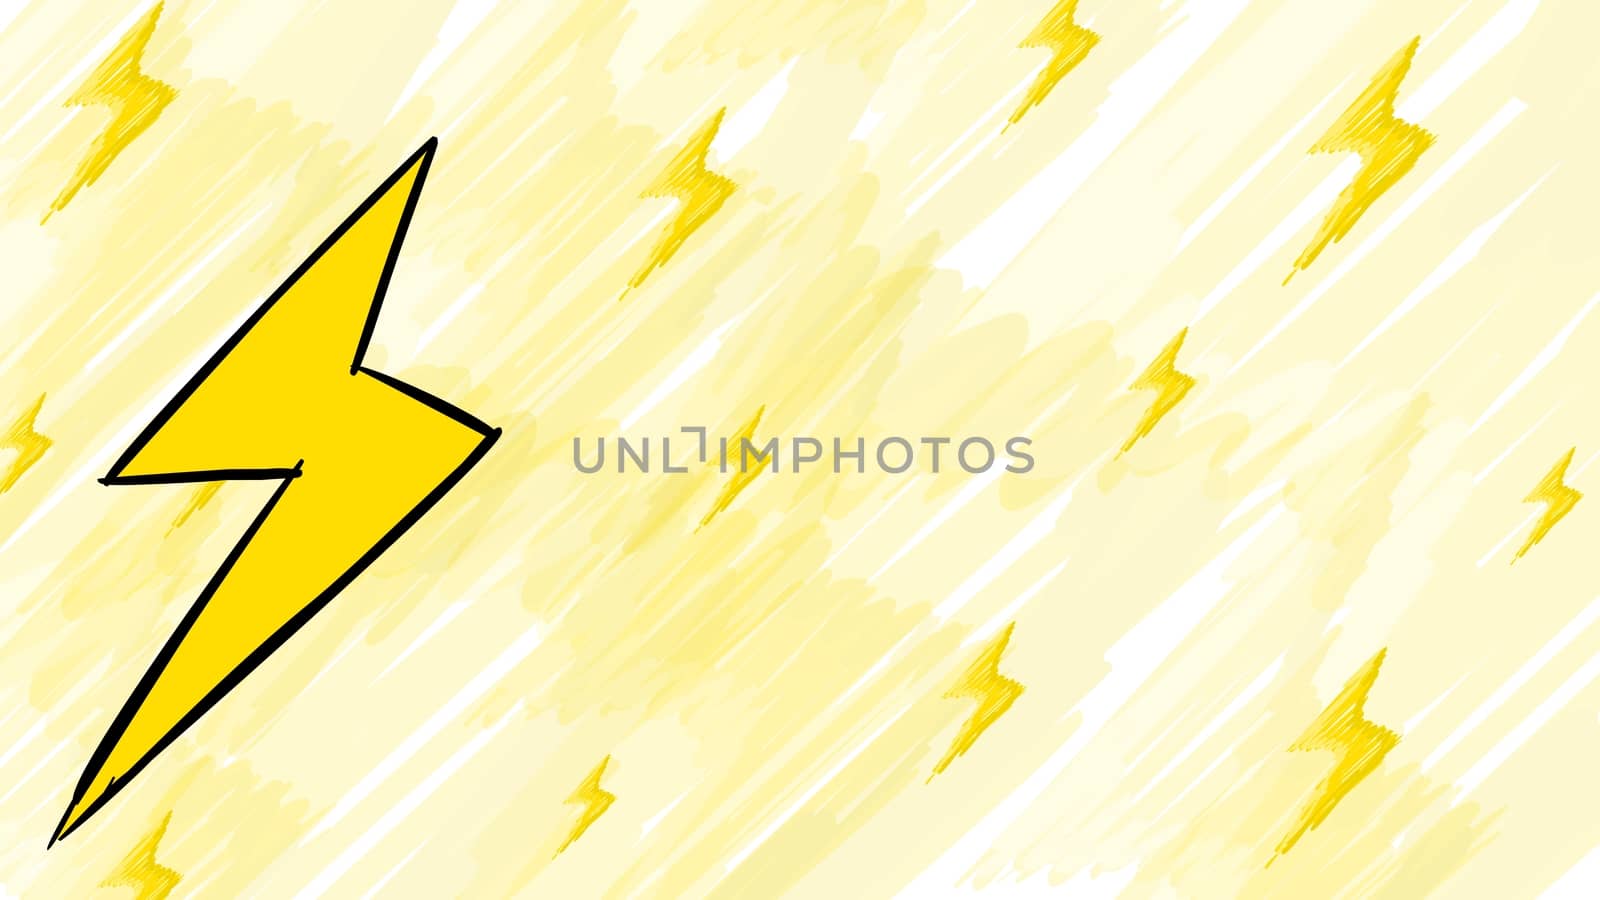 Background lightning Cartoon Sketch Drawing Style with white background. electric, yellow, power, electric, Thunder, Storm, Flash, light sign.